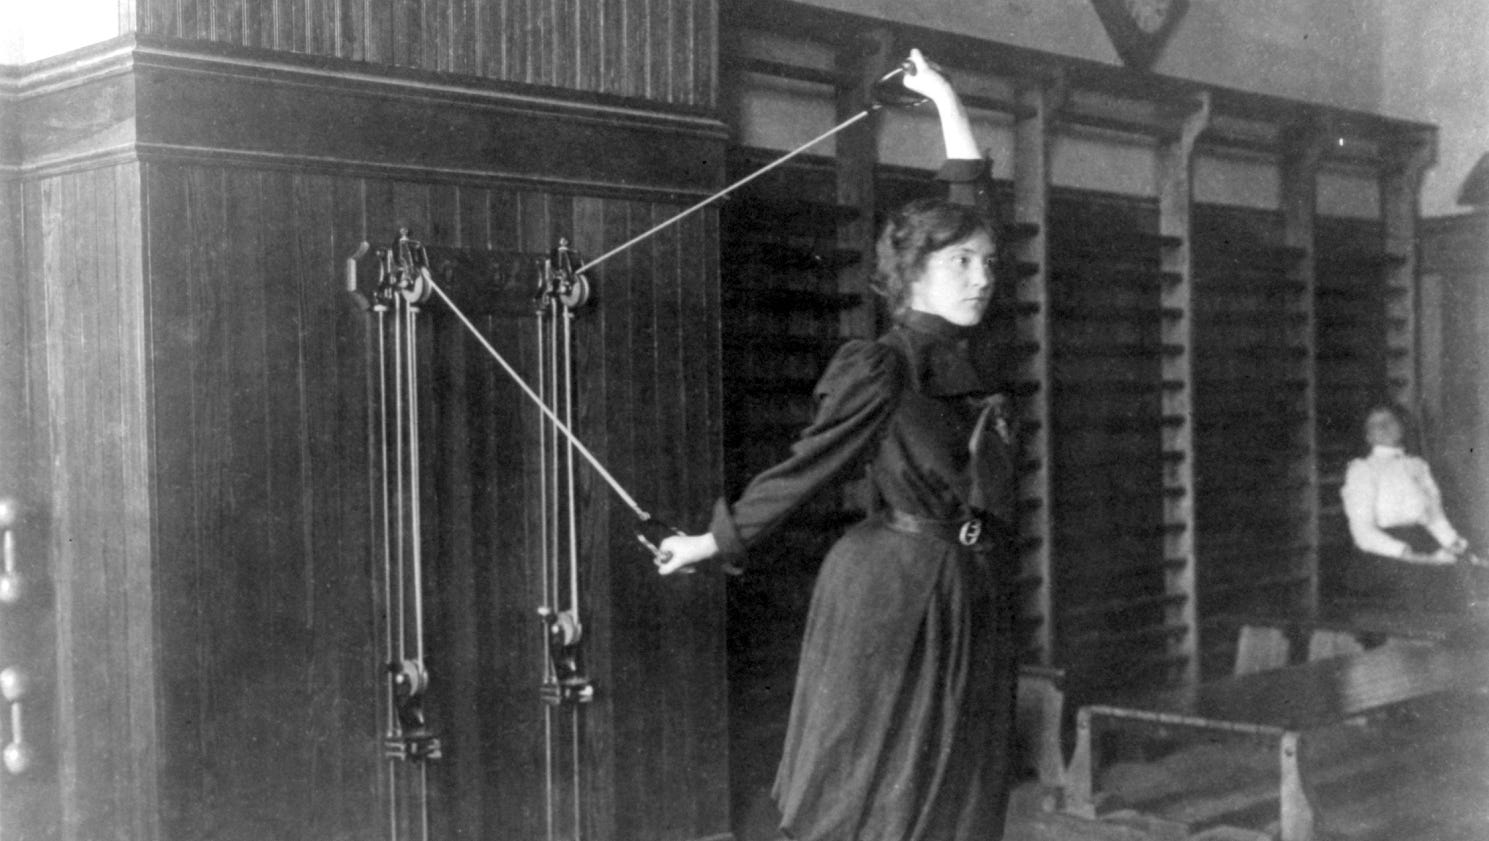 A high school girl exercises with pulleys in Washington D.C. in 1899.